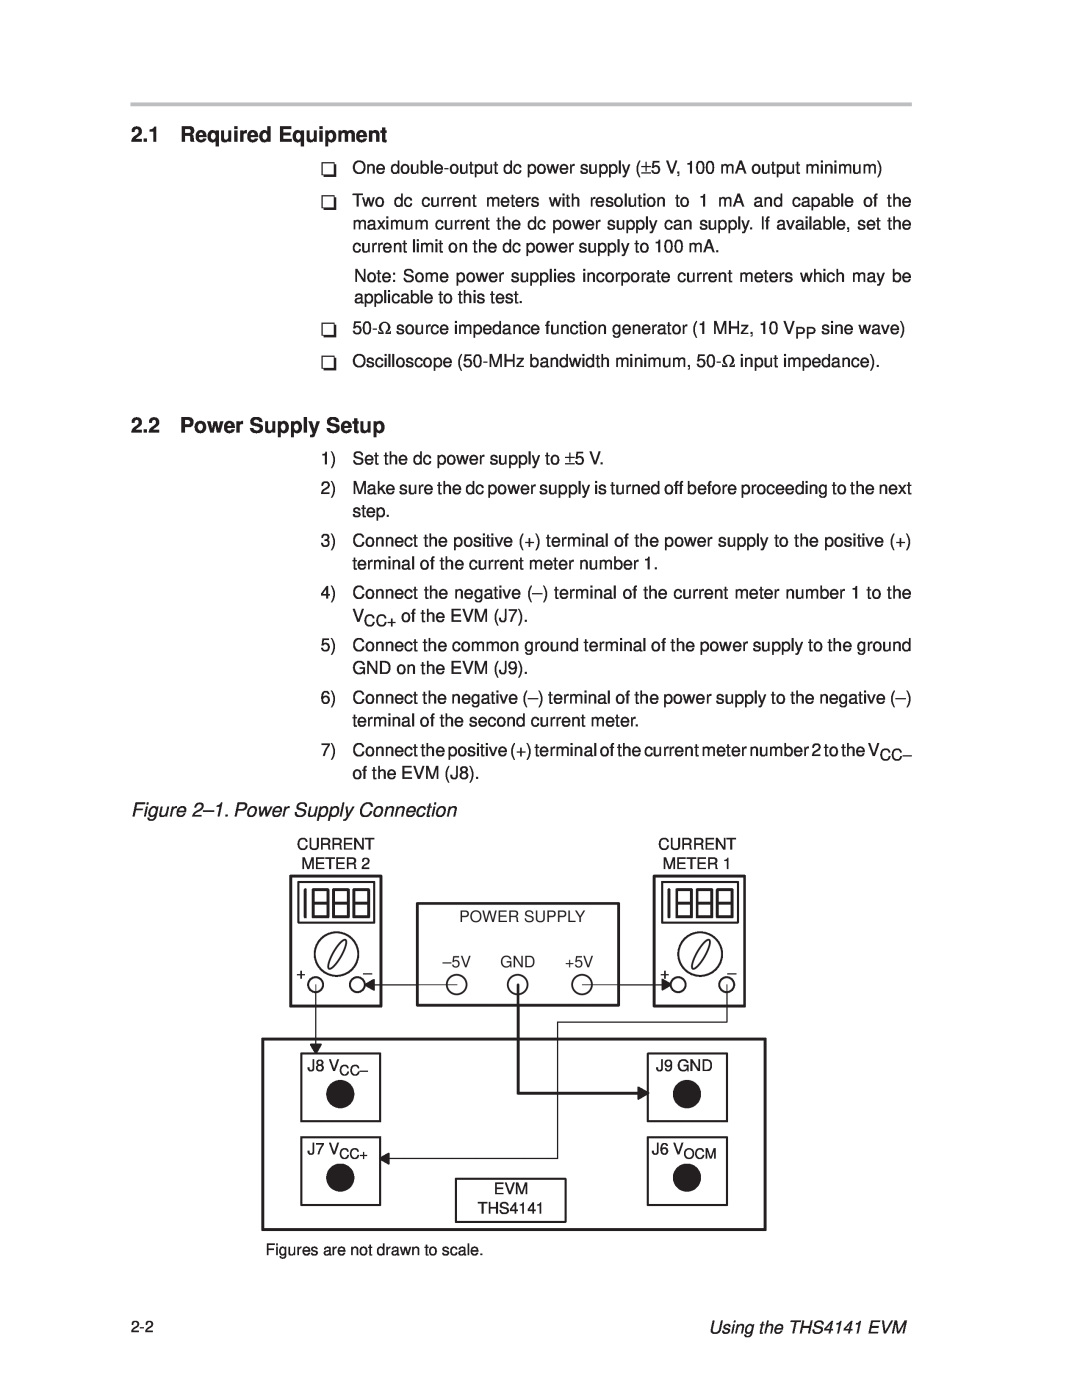 Texas Instruments manual Required Equipment, Power Supply Setup, ±1. Power Supply Connection, Using the THS4141 EVM 